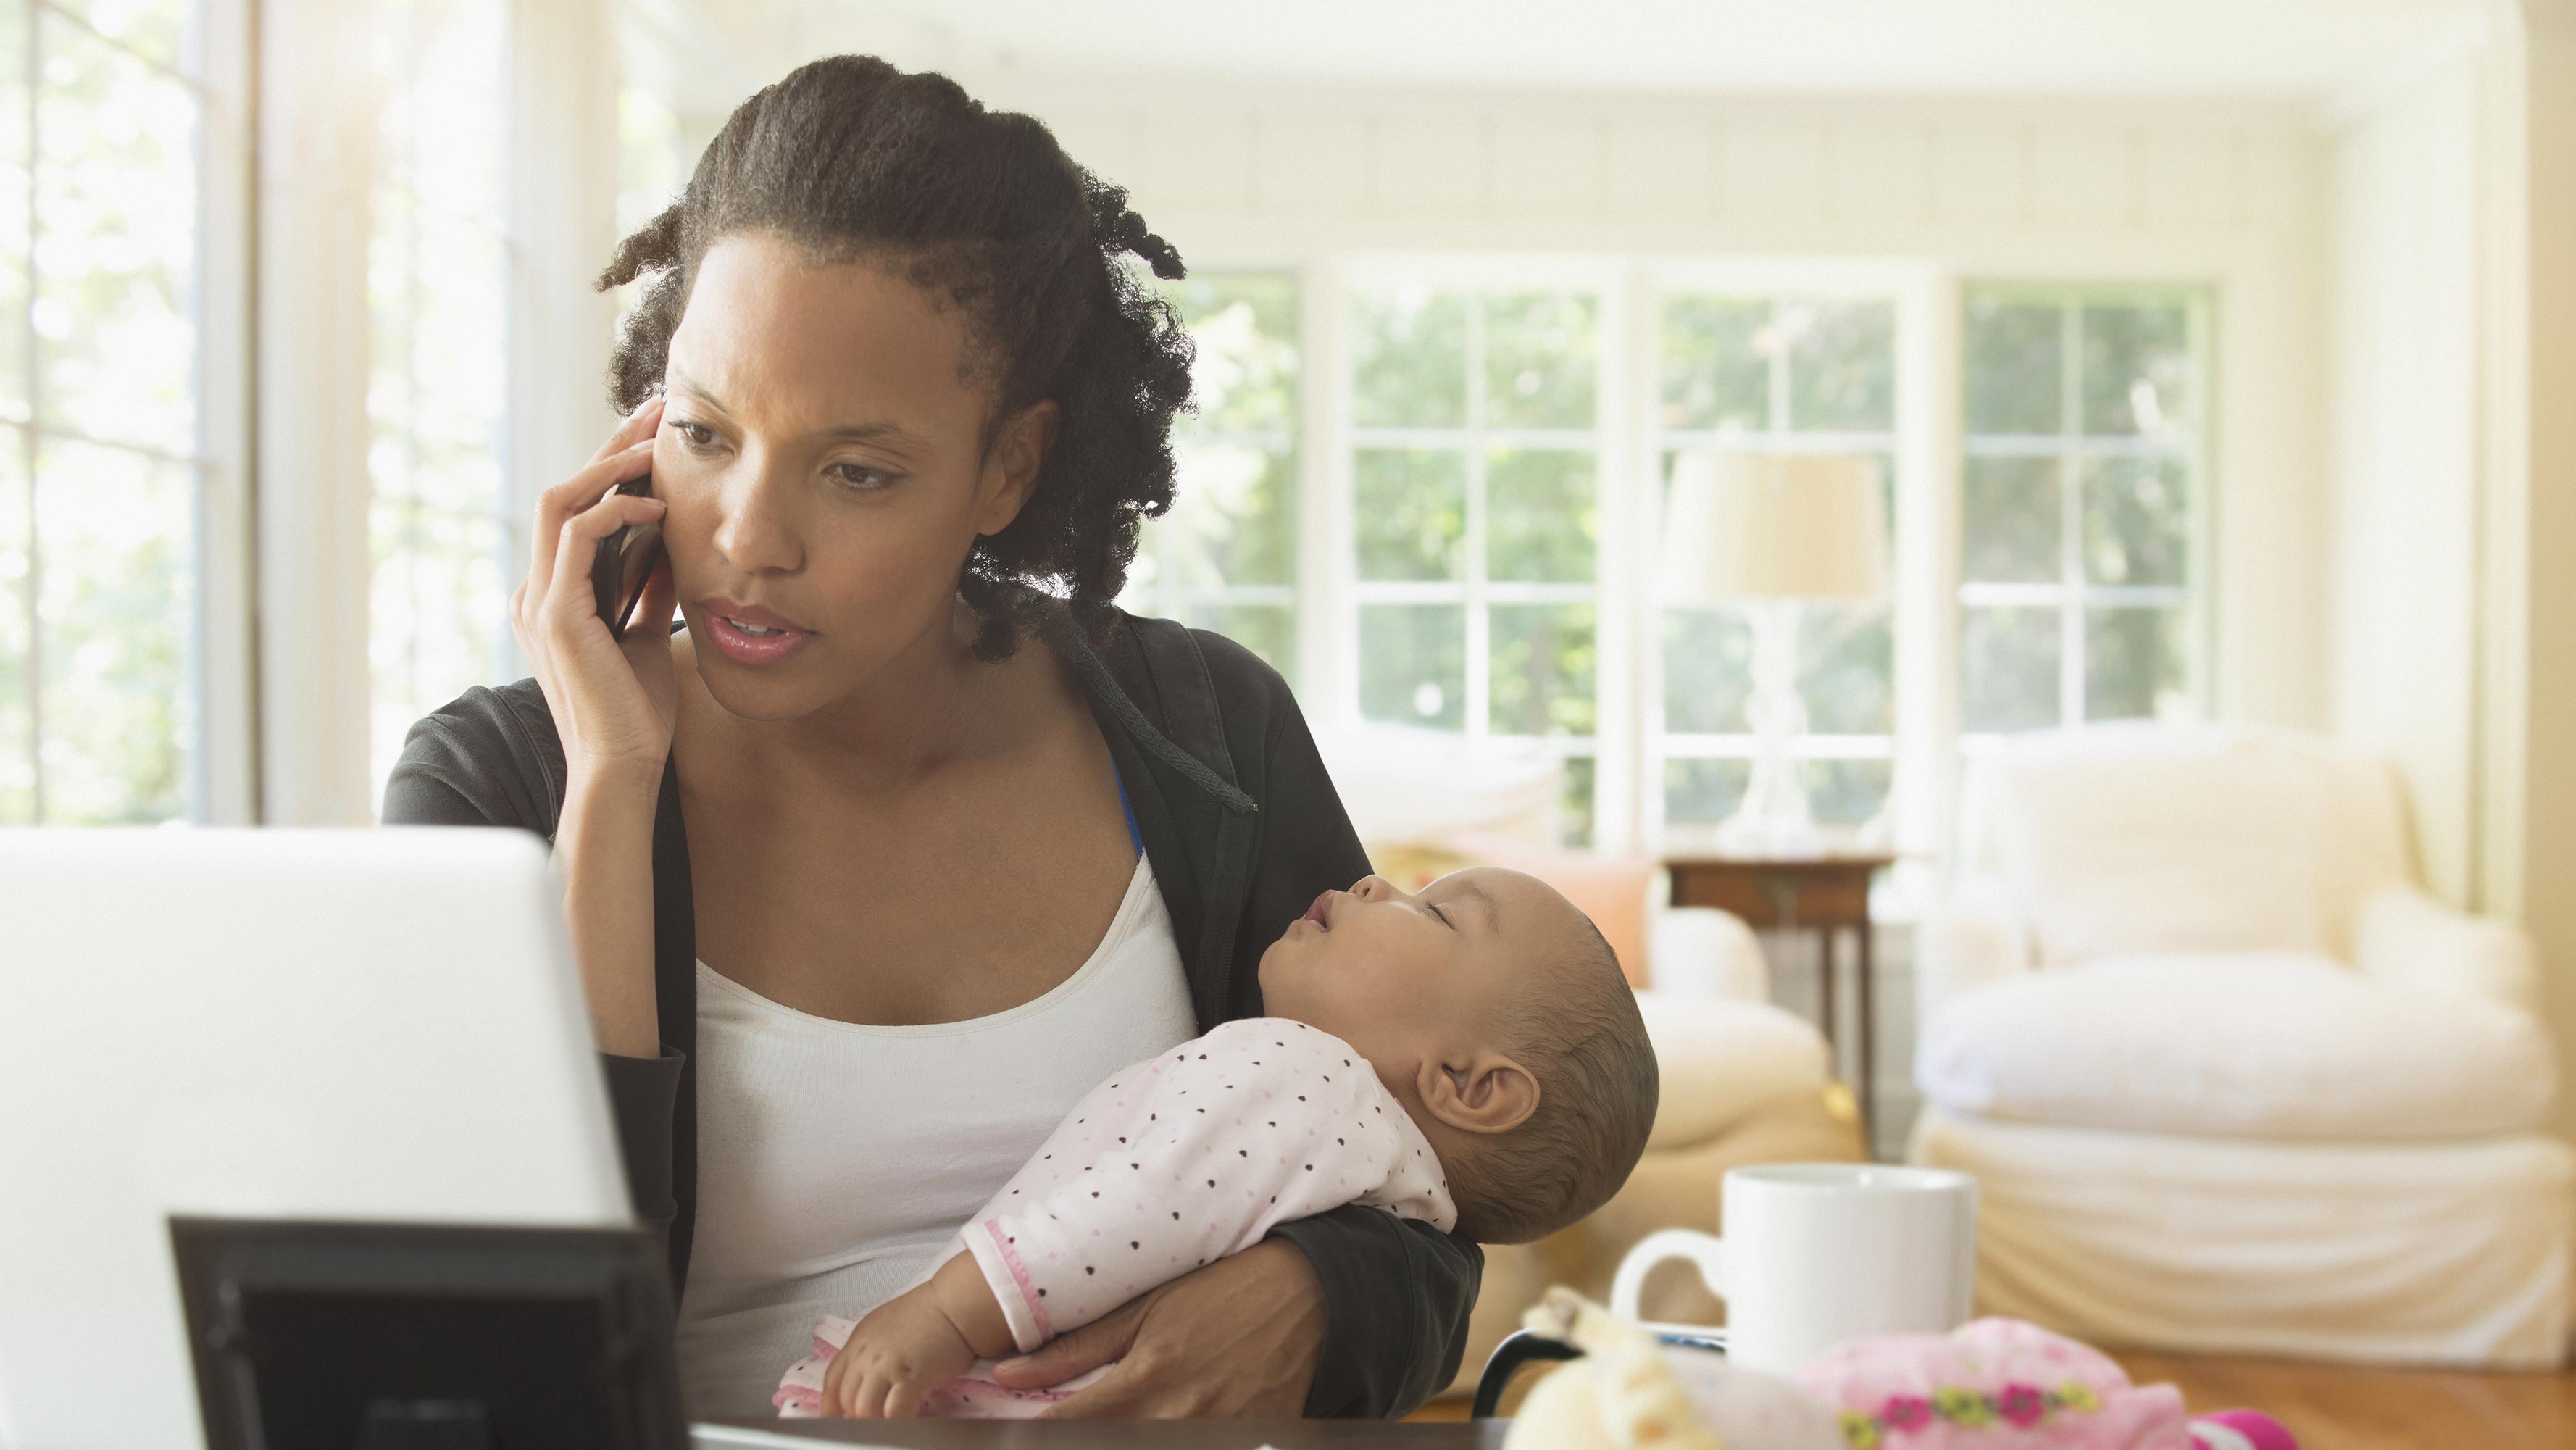 A mother uses her laptop and holds her sleeping infant while talking on the phone.